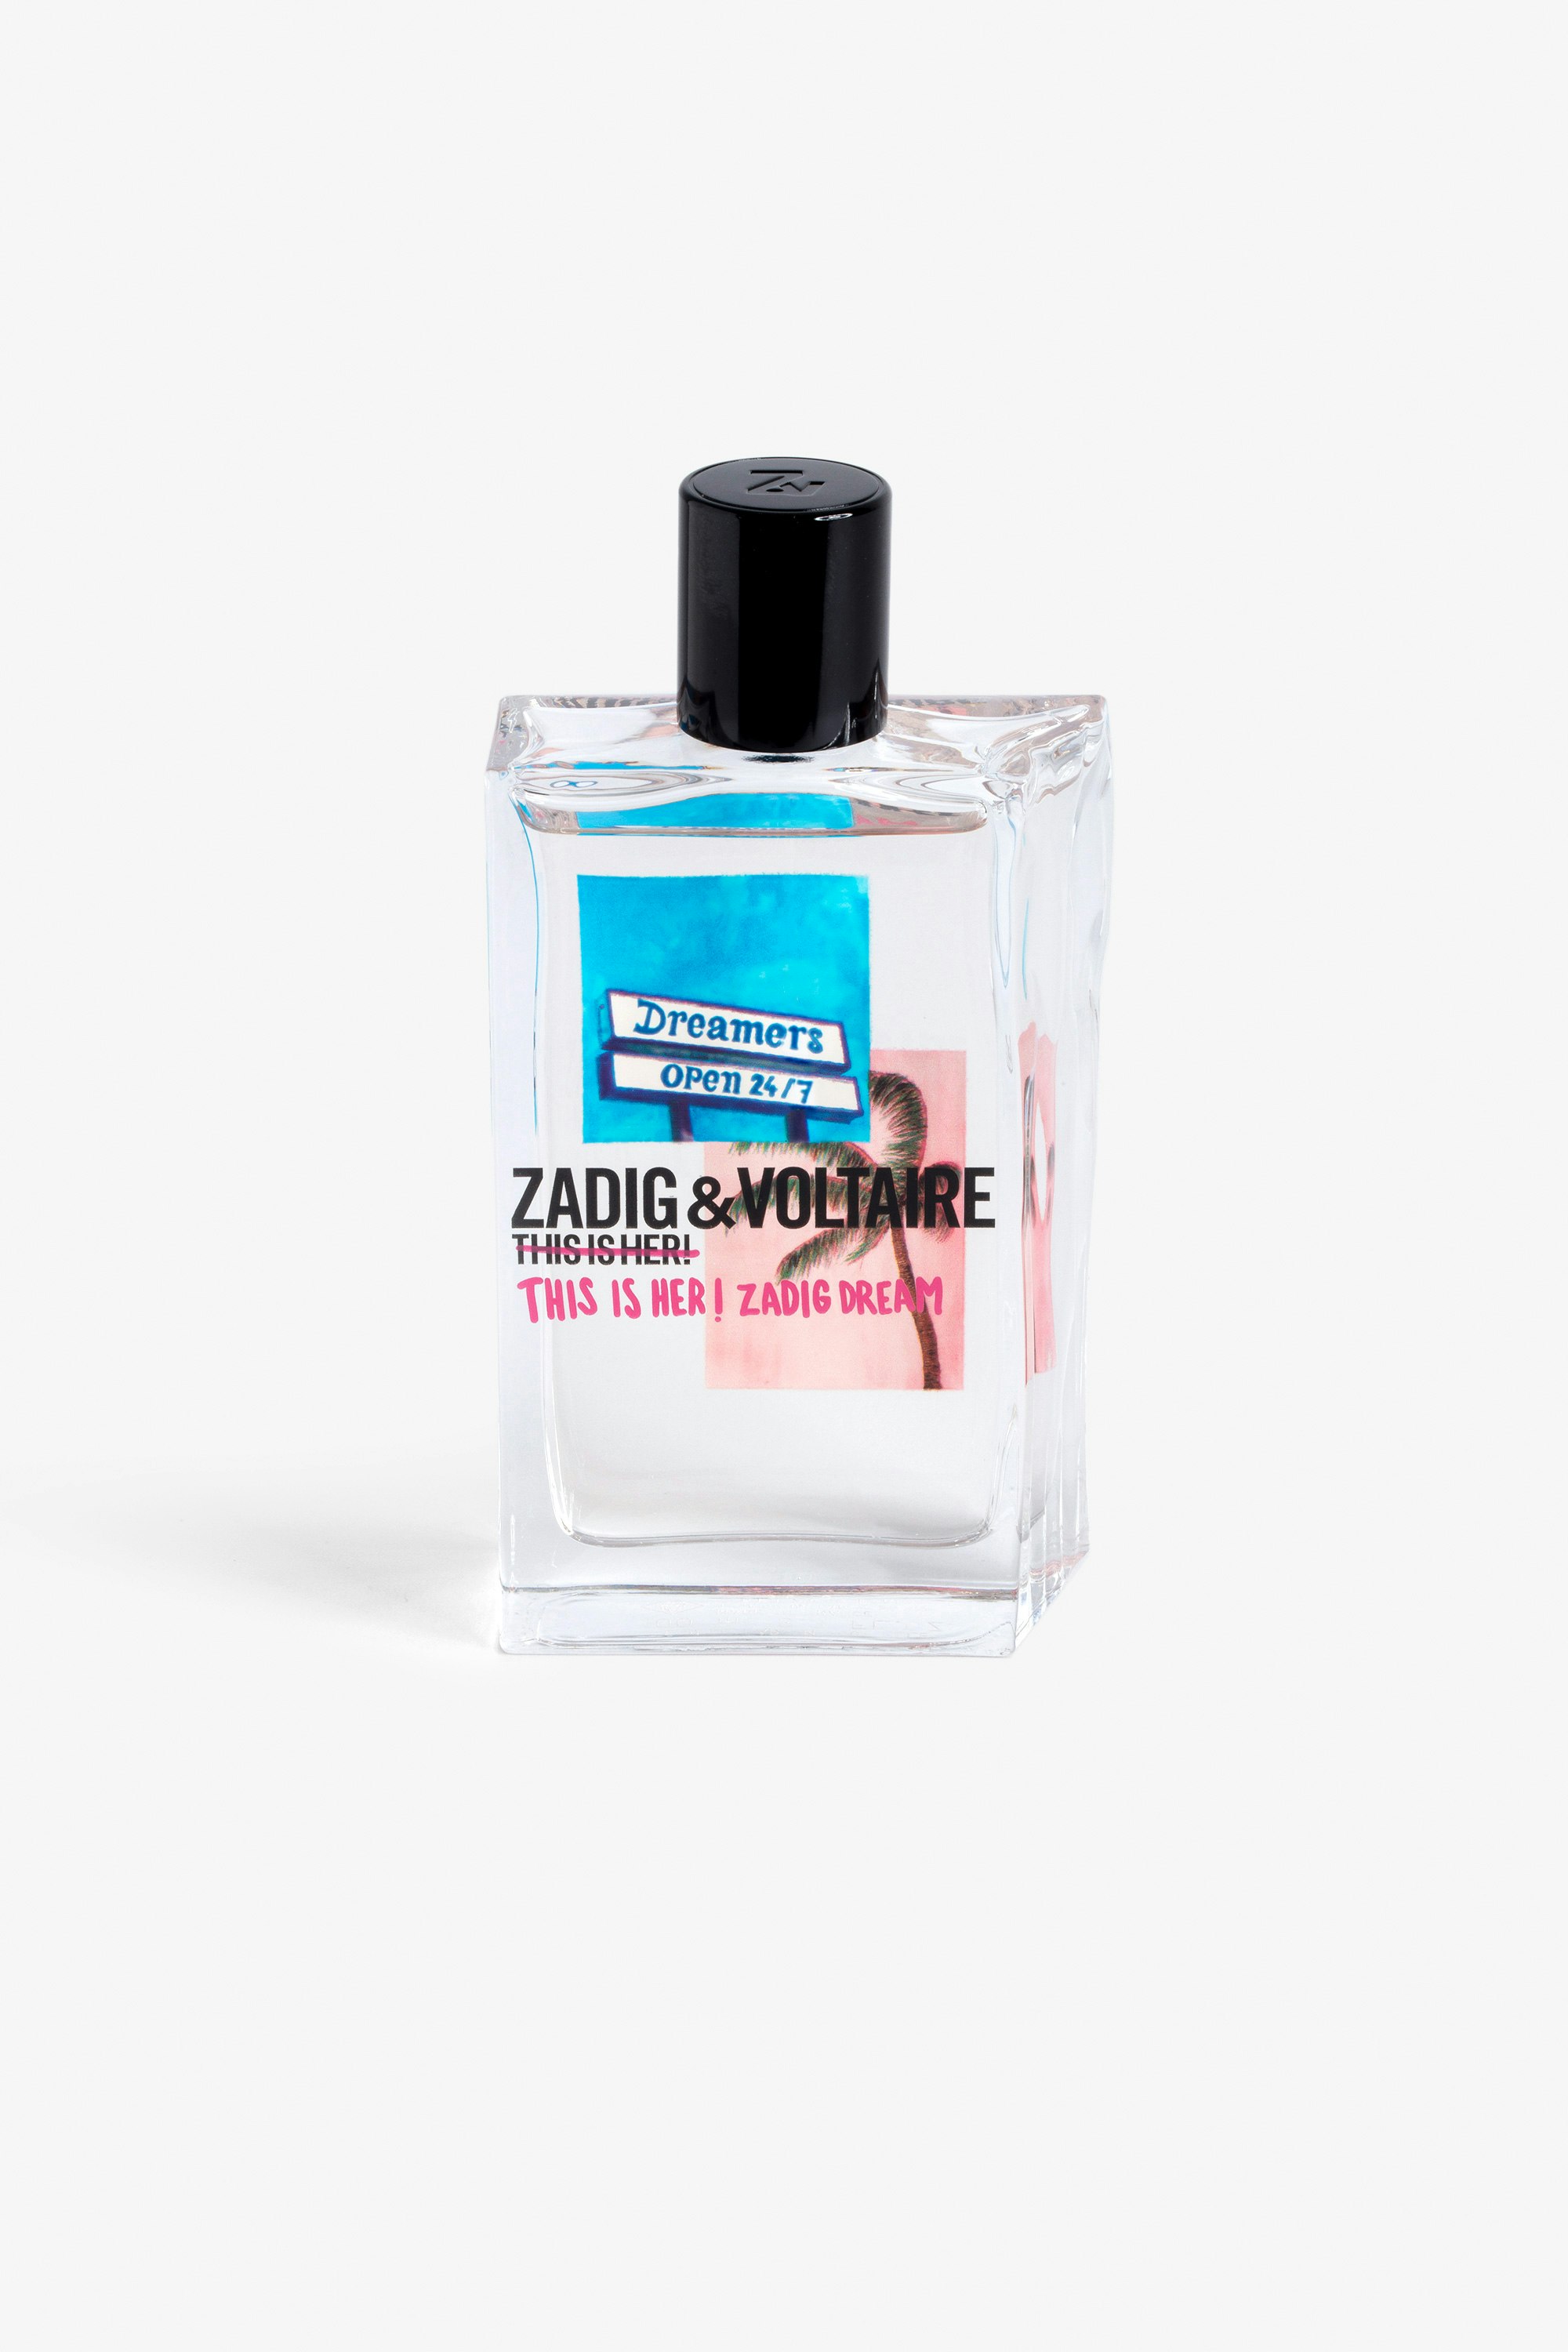 This Is Her! ZV Dream Fragrance 100ML - This Is Her! Zadig Dream Fragrance, 100ML.